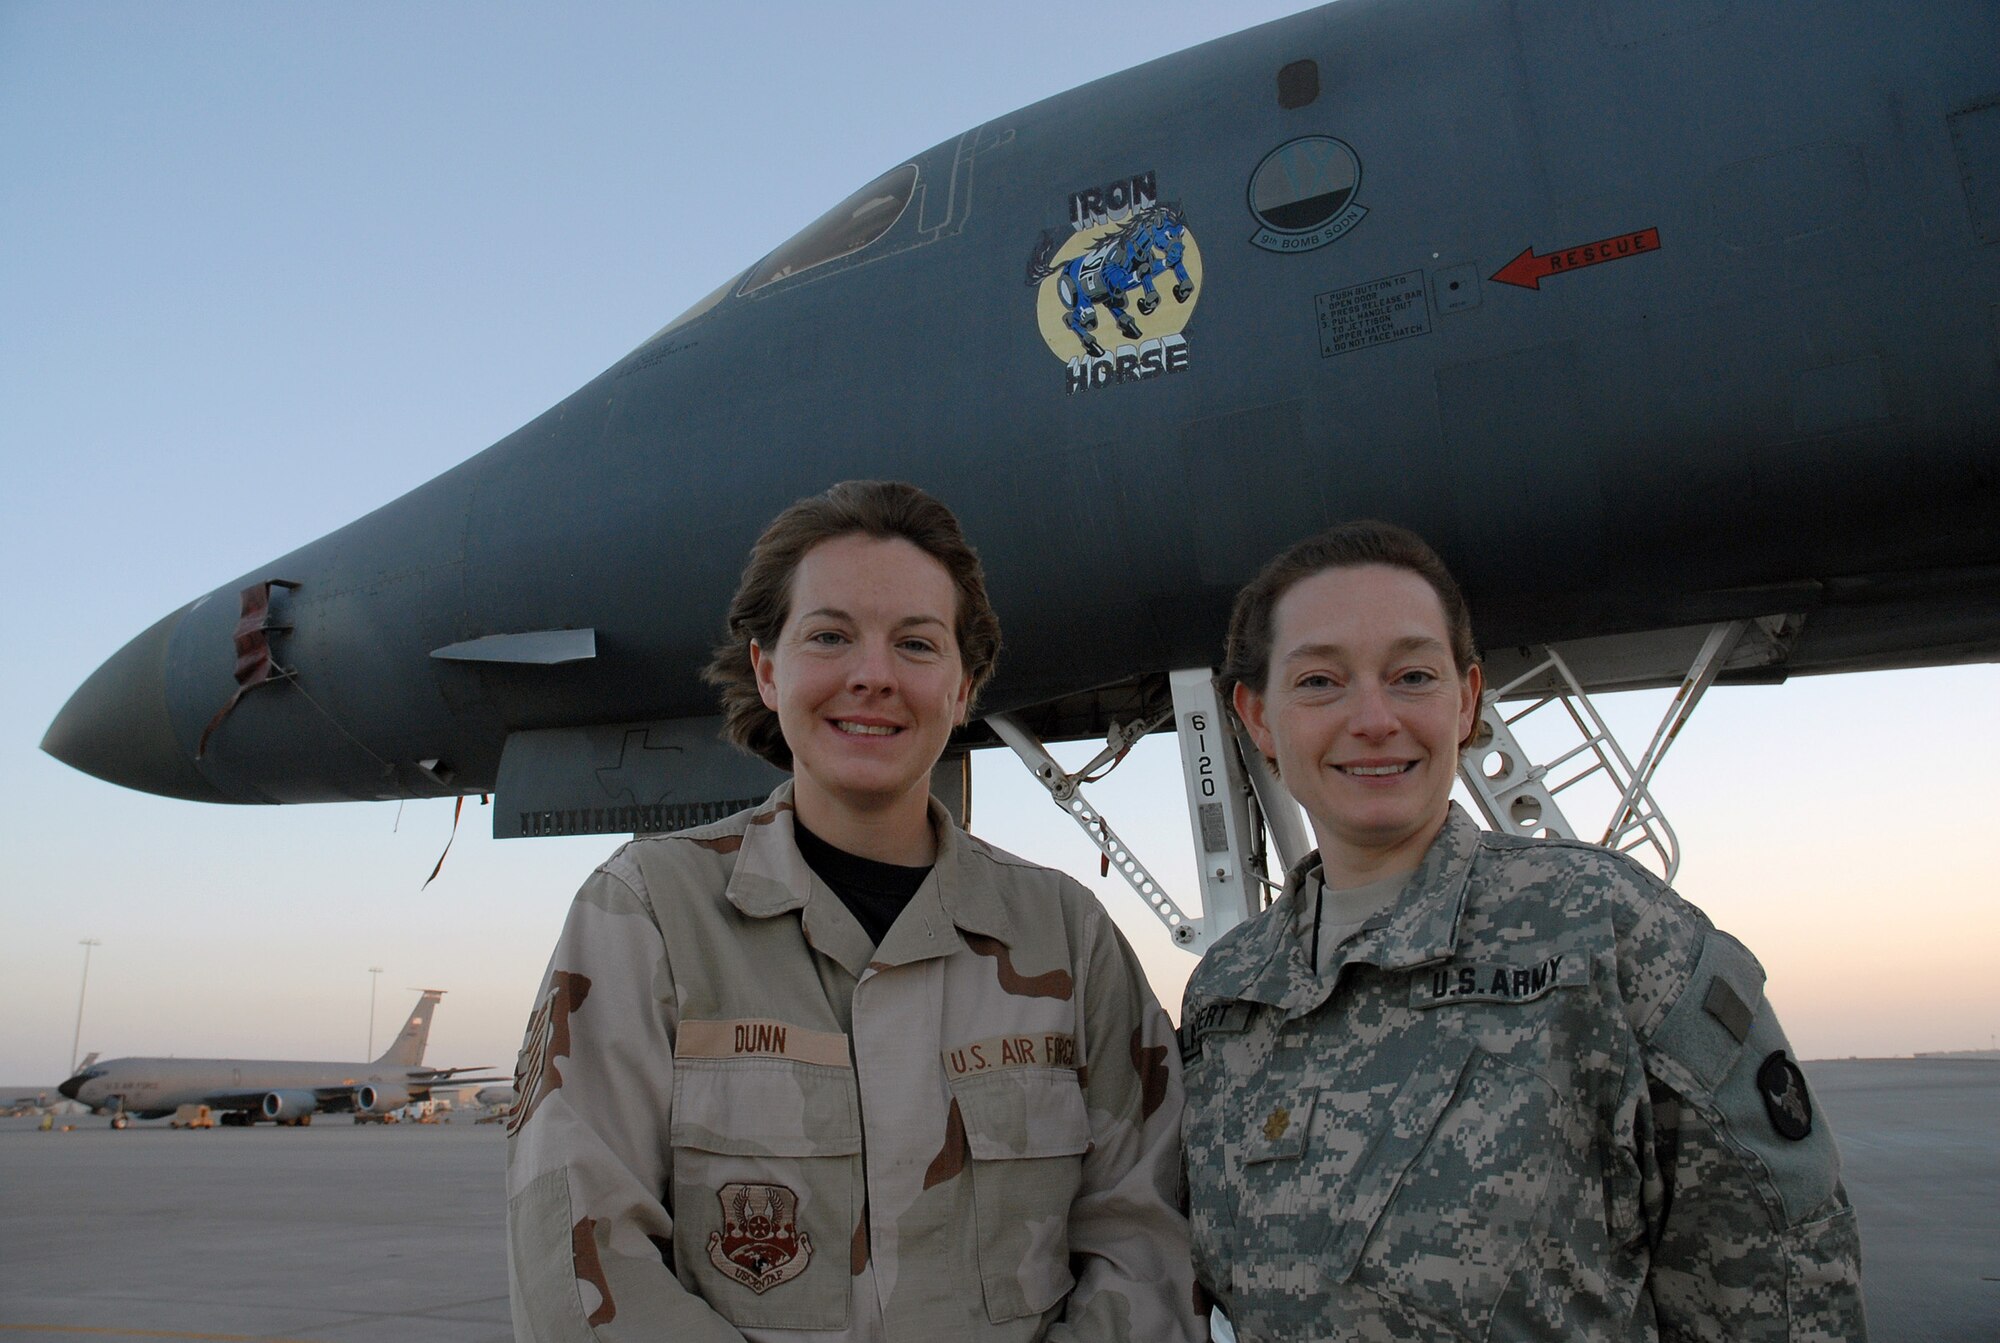 SOUTHWEST ASIA - Tech. Sgt. Jenny Dunn, 379th Expeditionary Squadron, weapons system technician, gives her sister, U.S. Army Maj. Melinda Lampert, a tour of a B-1B Lancer Bomber at a Southwest Asia air base Dec. 11. The sisters, both deployed to the Southwest Asia theater, met for a brief visit. Major Lampert is visiting her sister on a four-day pass from an Army Base in Iraq. Major Lampert is a physician's assistant with the Minnesota Army National Guard. Sergeant Dunn's home station is Ellsworth Air Force Base, S. D. The sister's hometown is Bowlus, Minn. (U. S. Air Force photo/Staff Sgt. Douglas Olsen)